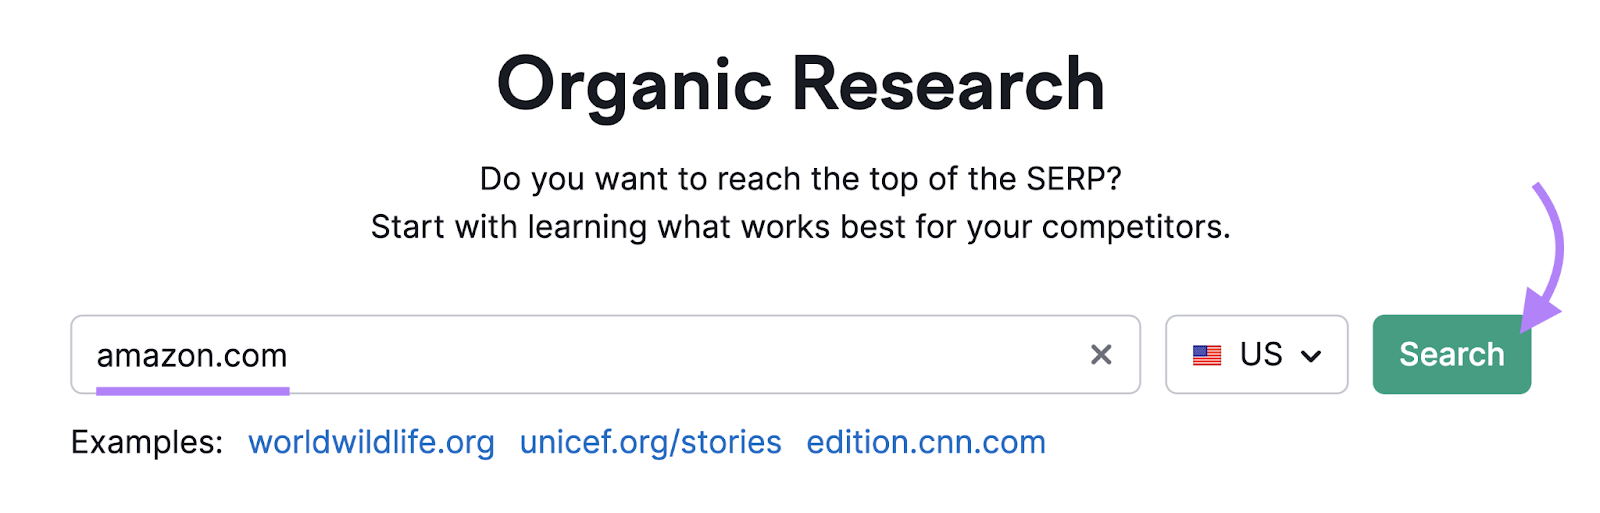 search for amazon.com in organic research tool